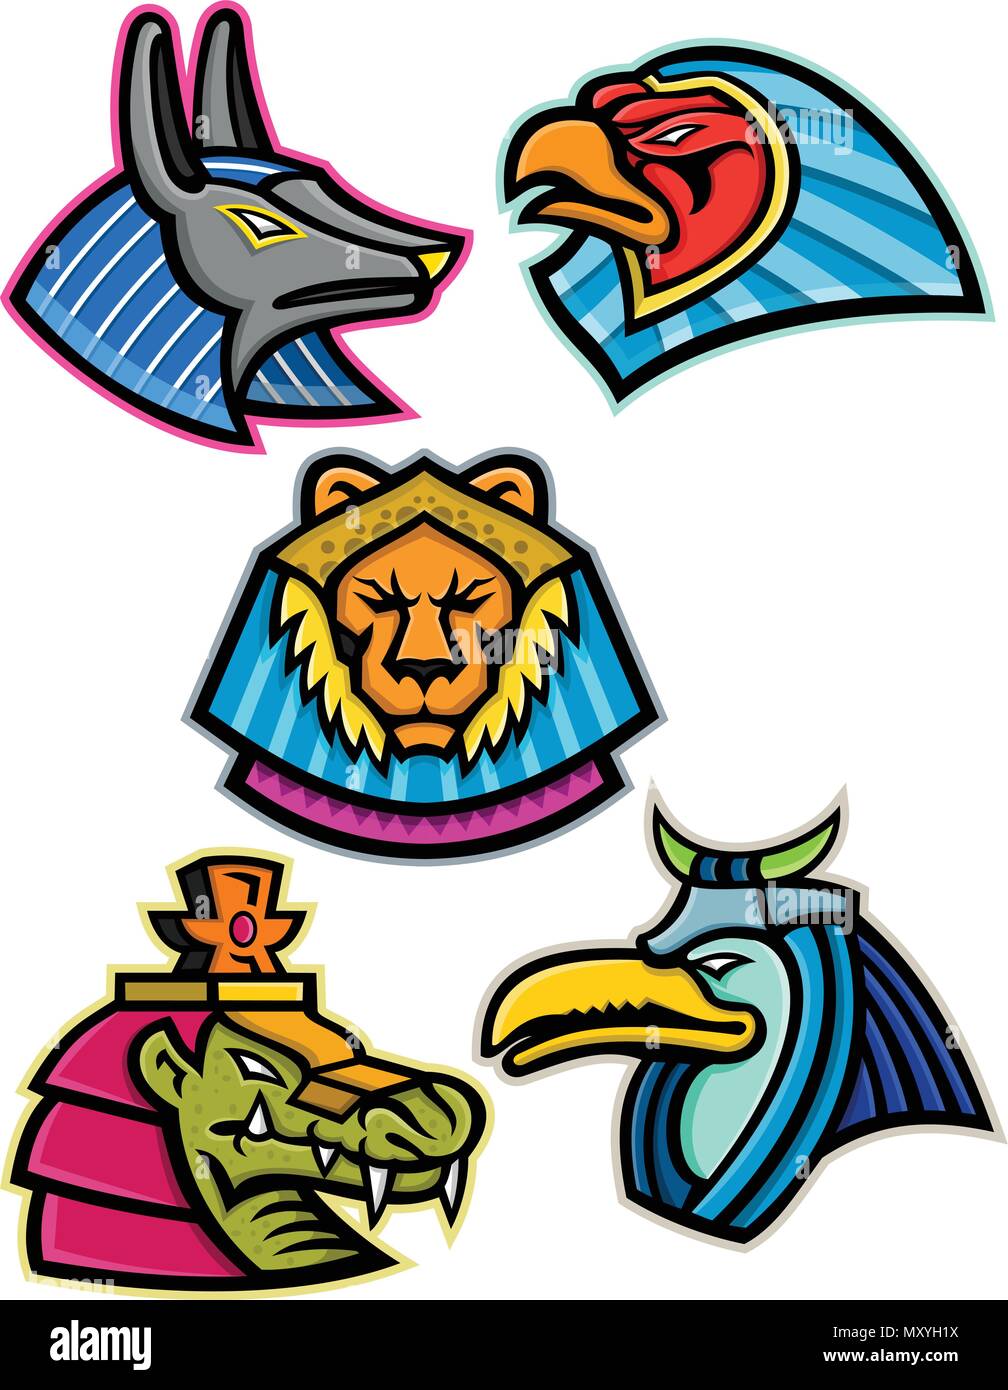 Mascot icon illustration set of heads of ancient Egyptian animal gods or deities like Anubis,sun god Ra, Sekhmet, Sobek and Thoth  viewed from side on Stock Vector